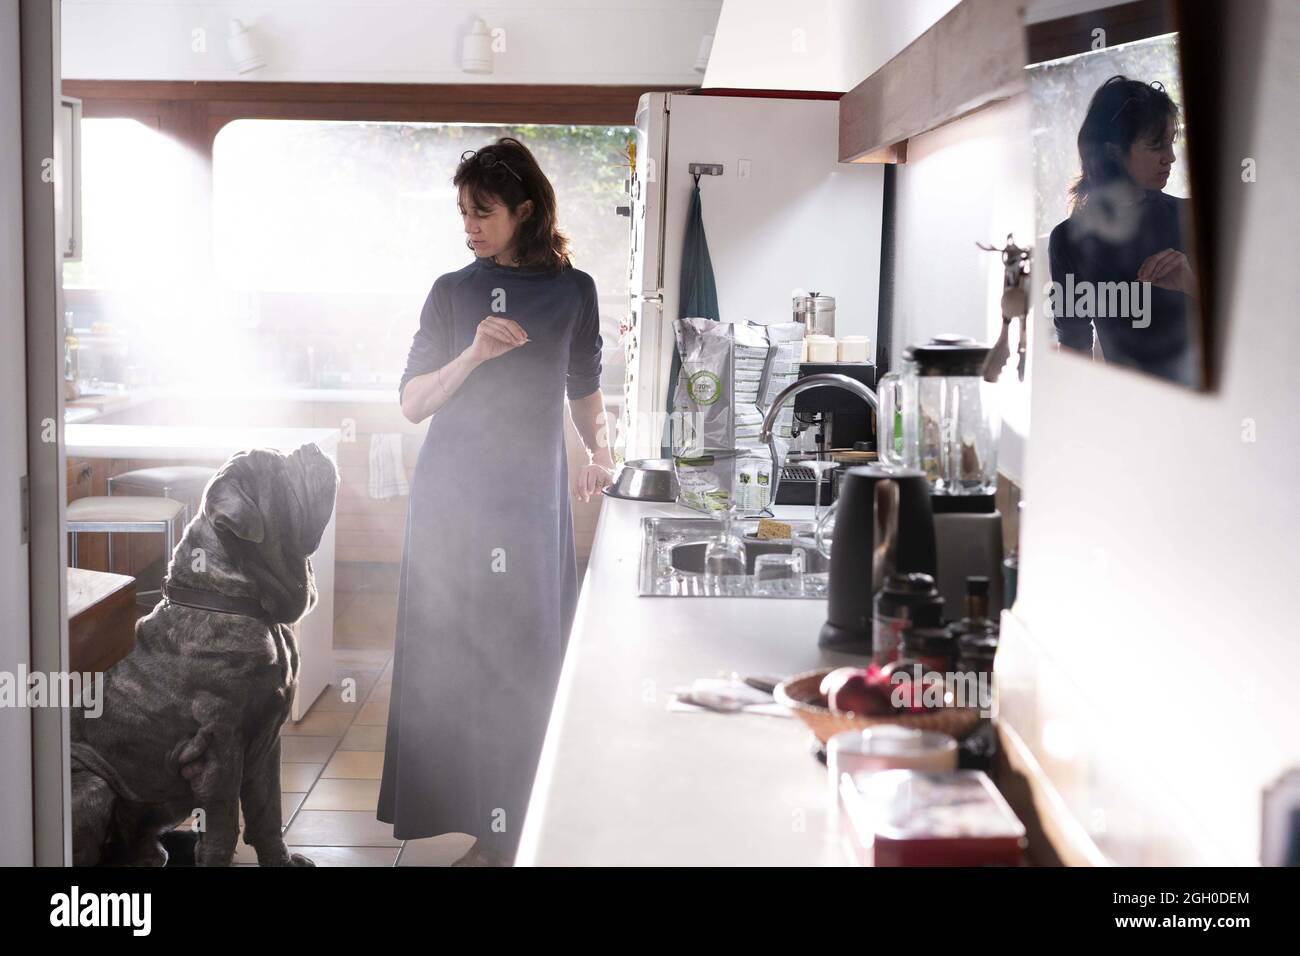 CHARLOTTE GAINSBOURG in MON CHIEN STUPIDE (2019), directed by YVAN ATTAL. Credit: Montauk Films / Same Player / Album Stock Photo